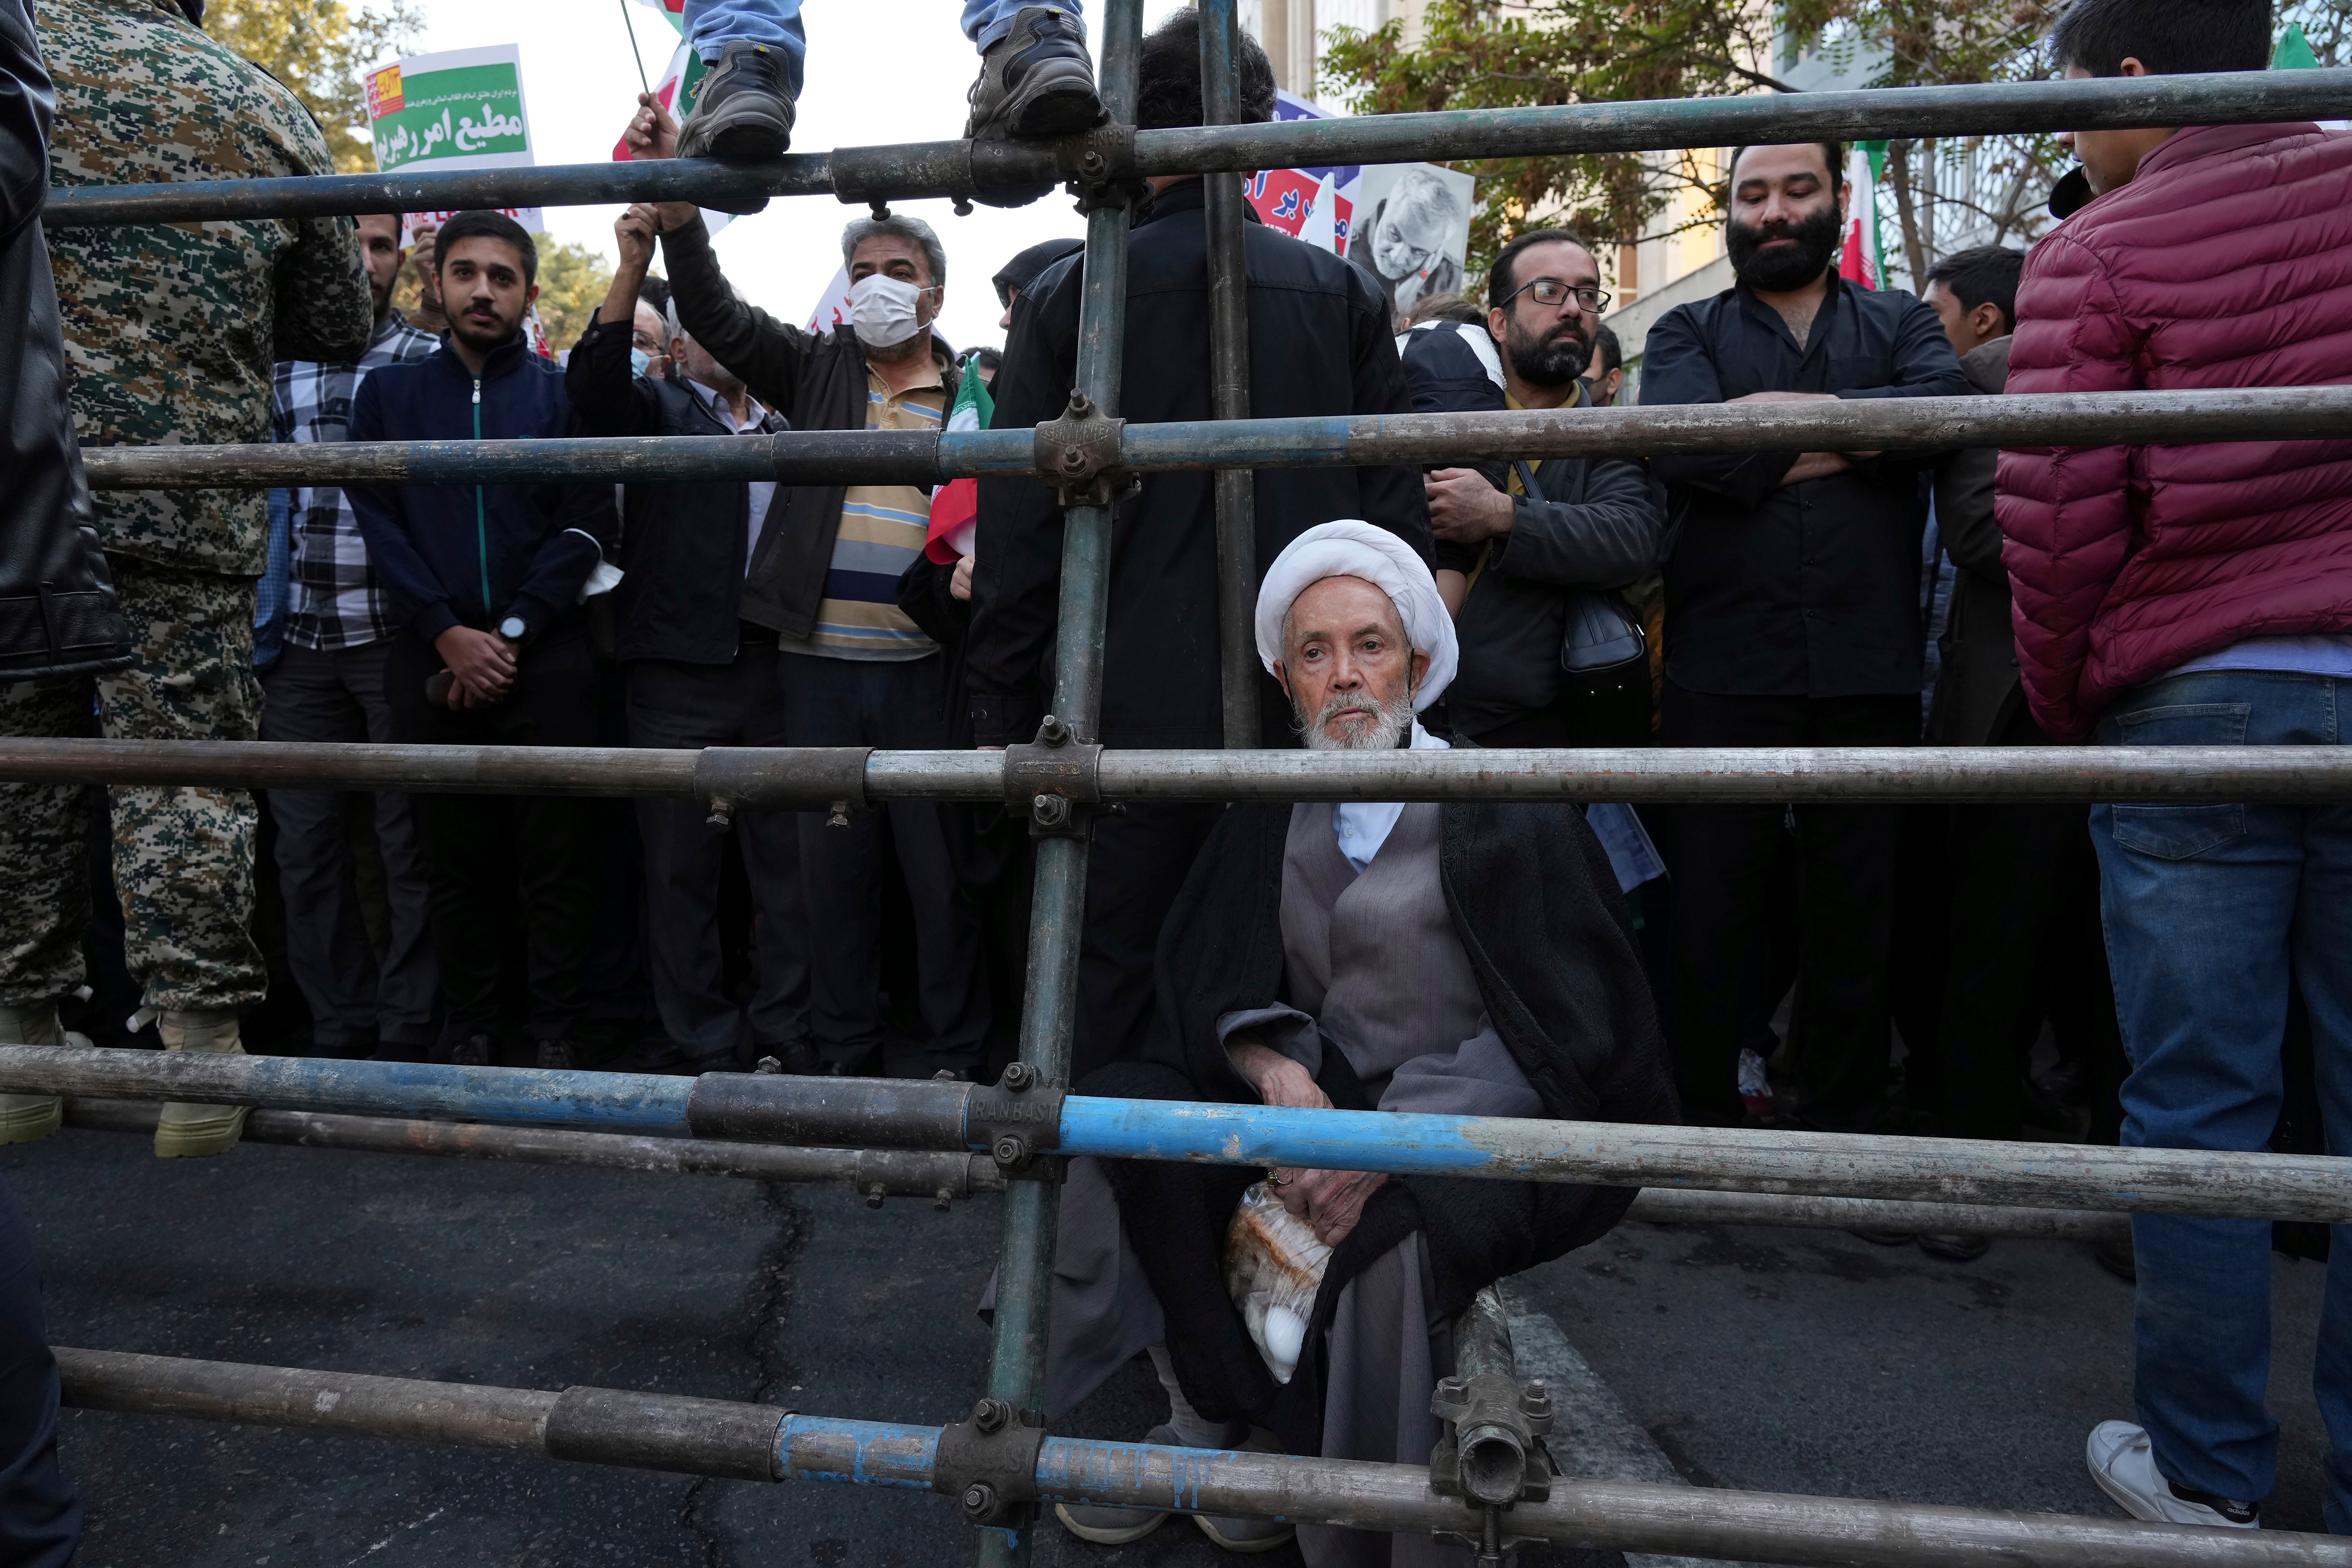 Iran’s authorities are struggling to control the protests